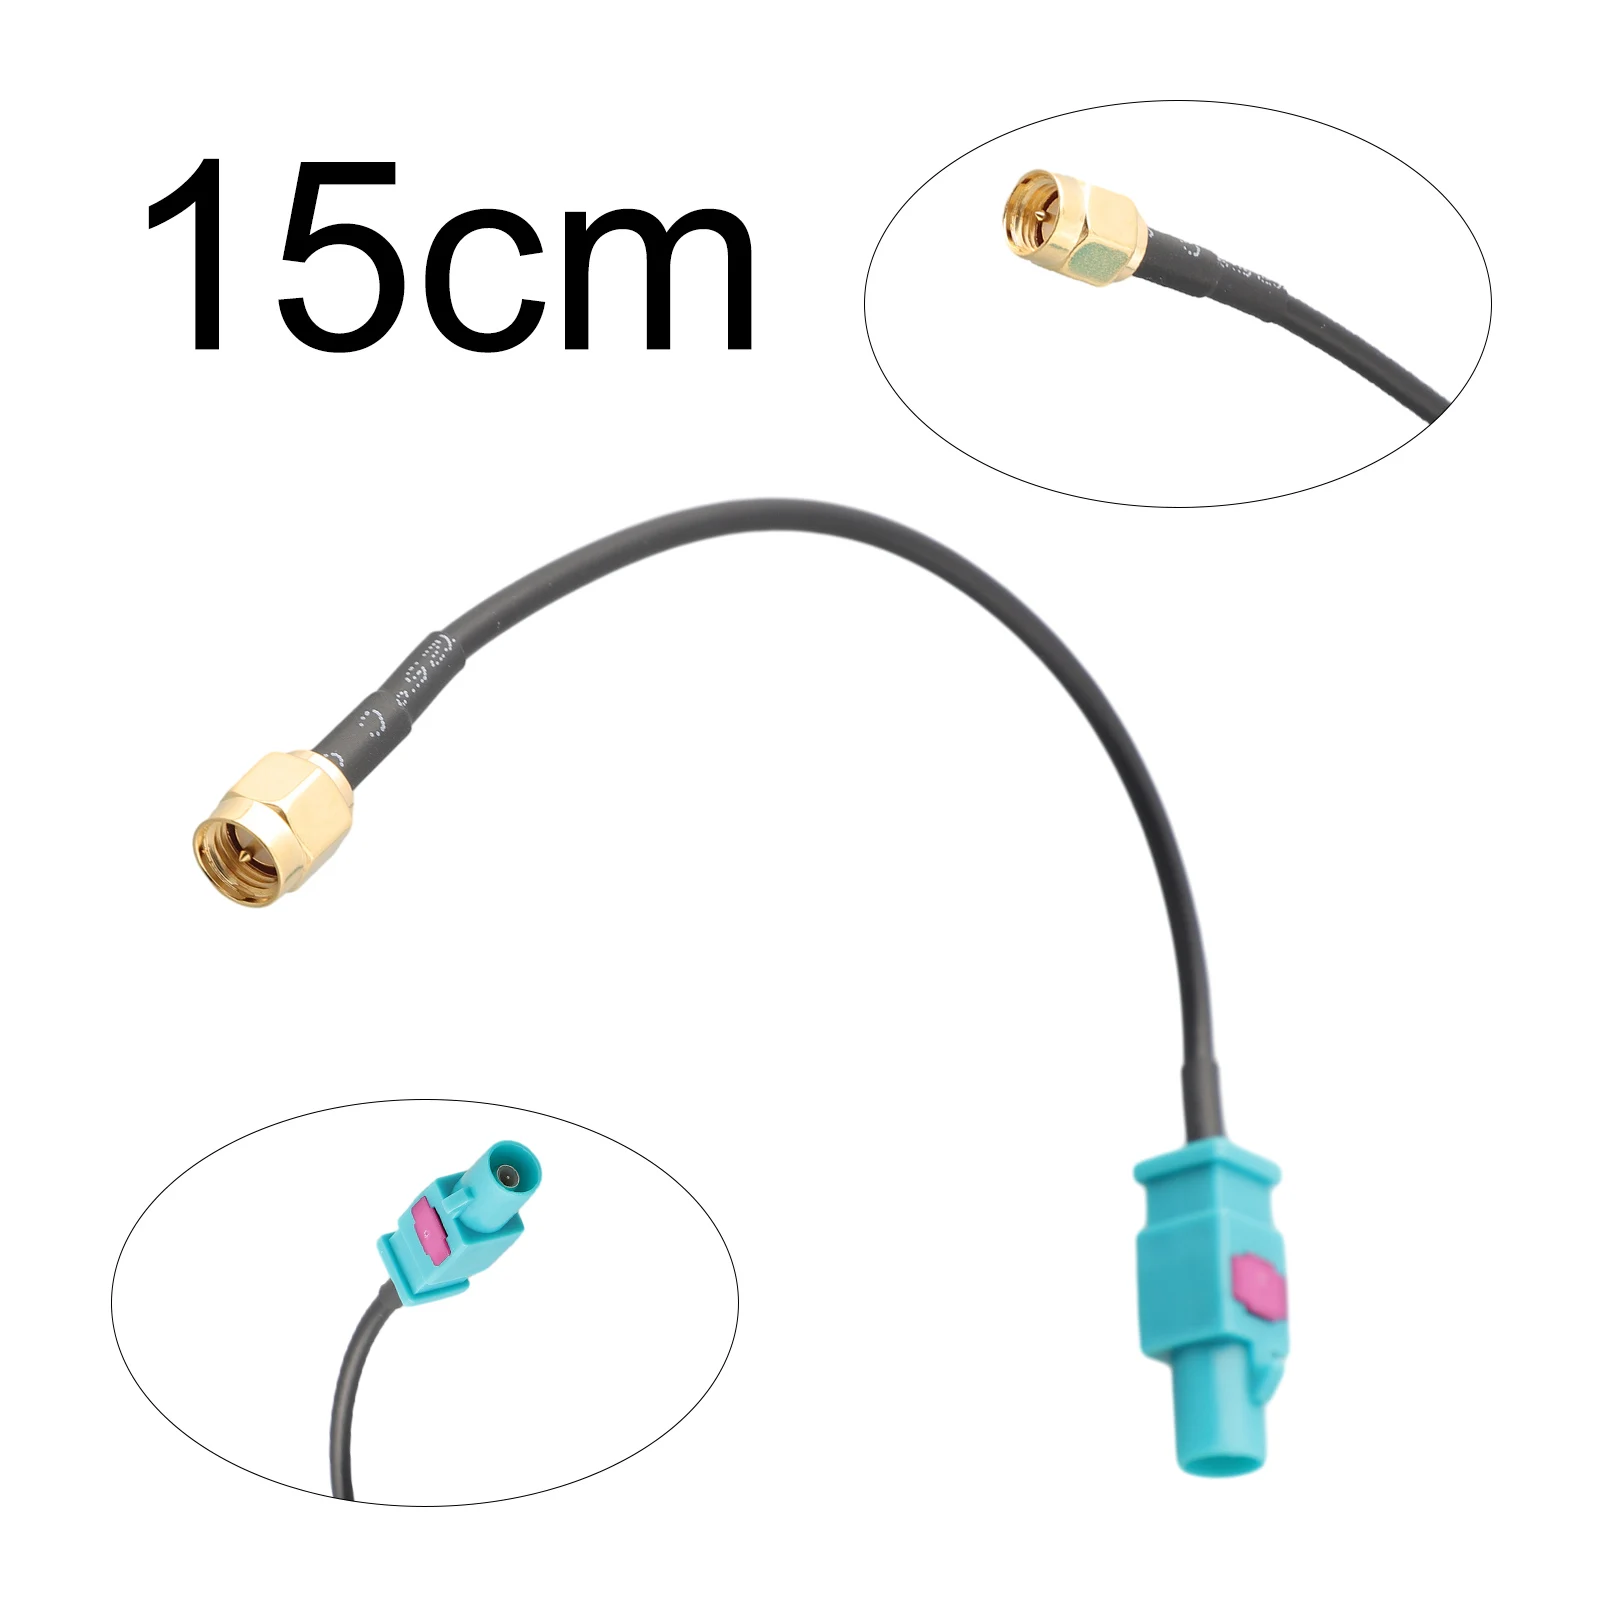 

1pc Car 15cm RG174 Plug Cable Universal Antenna Adapter Cable Fakra-Z Male To SMA Male For GSM GPS DAB Exterior Parts Aerials